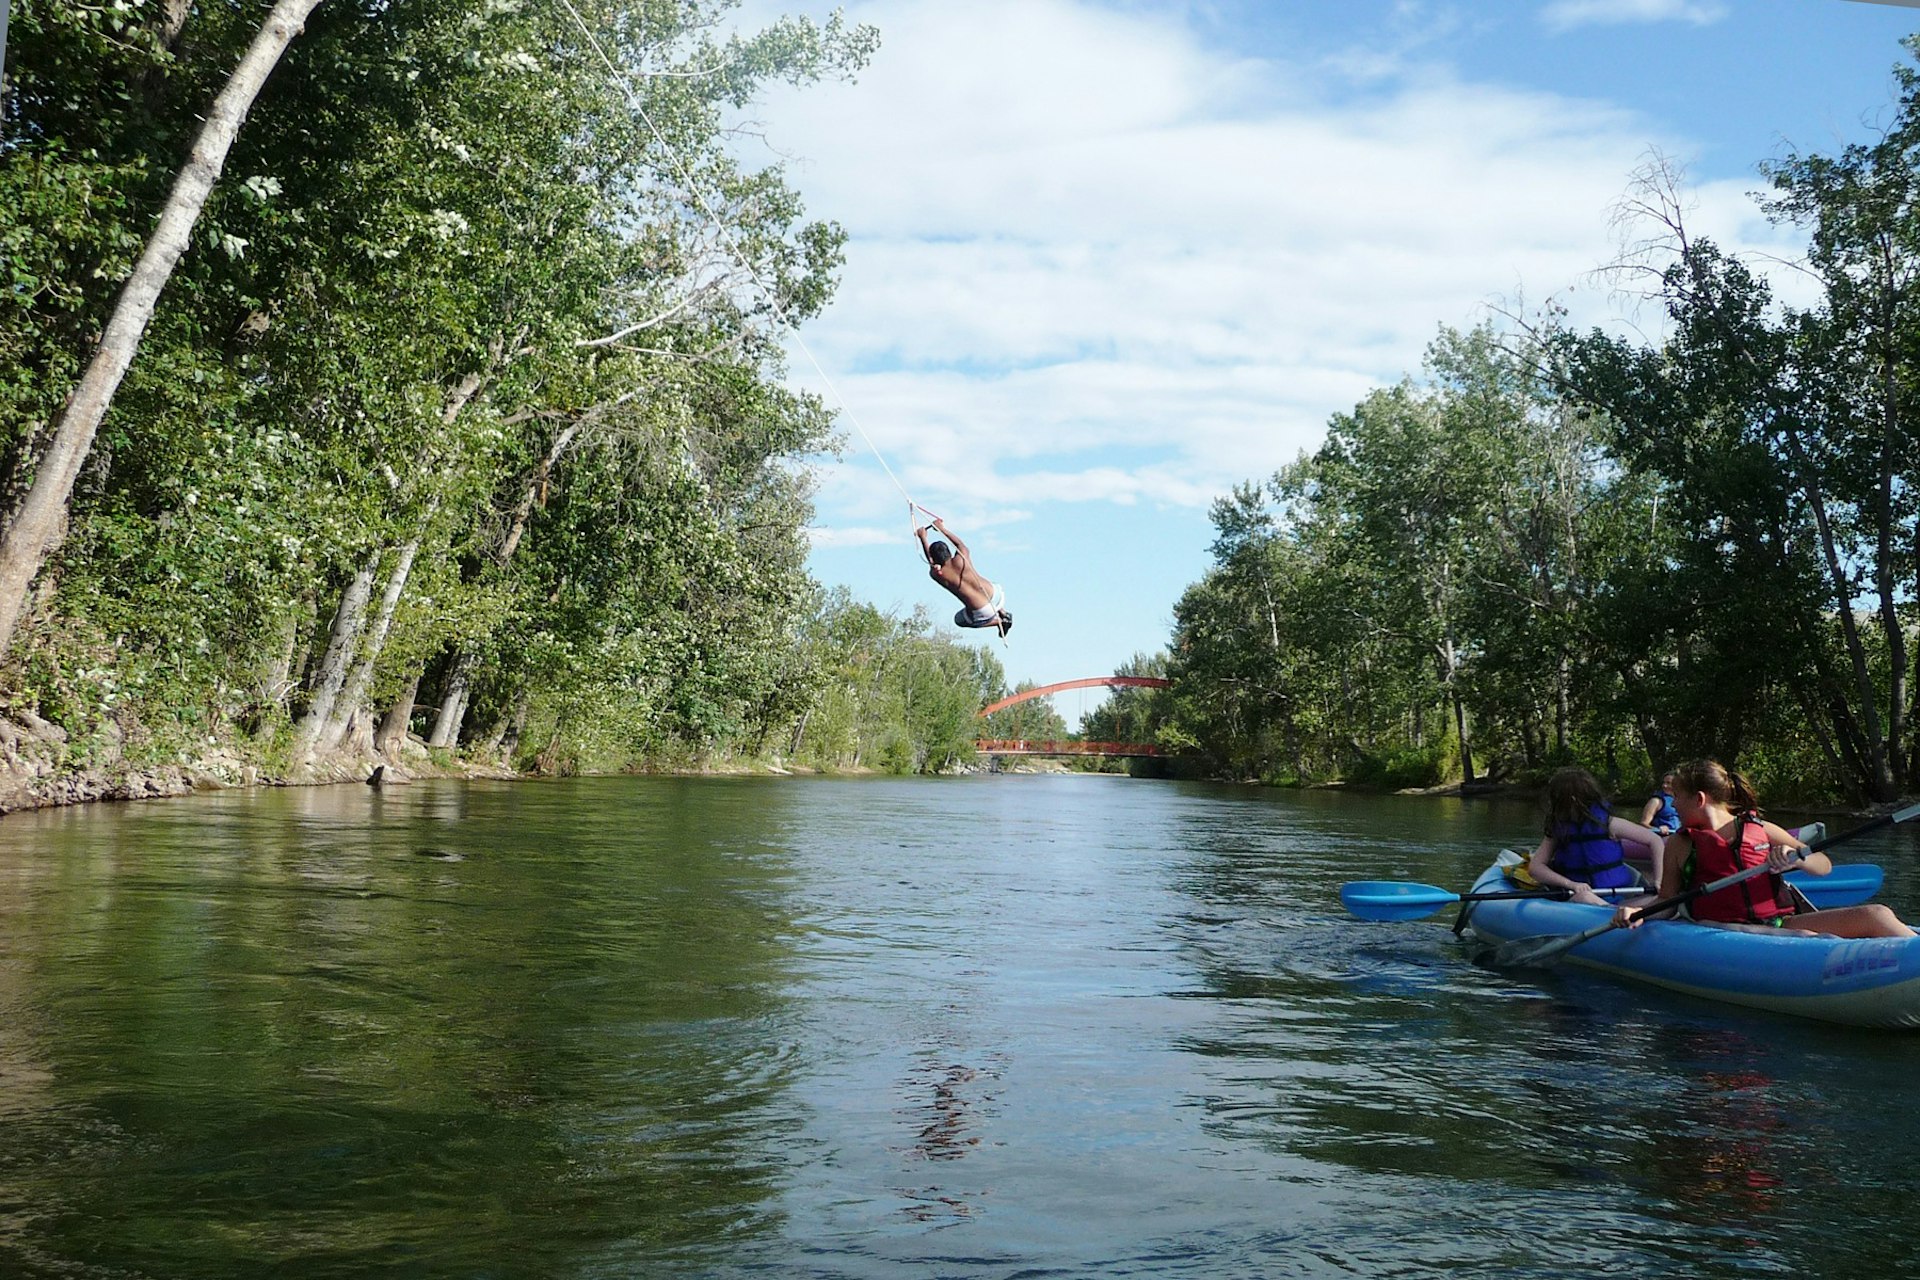 Rafters watch as someone flips off a rope swing into the Boise River